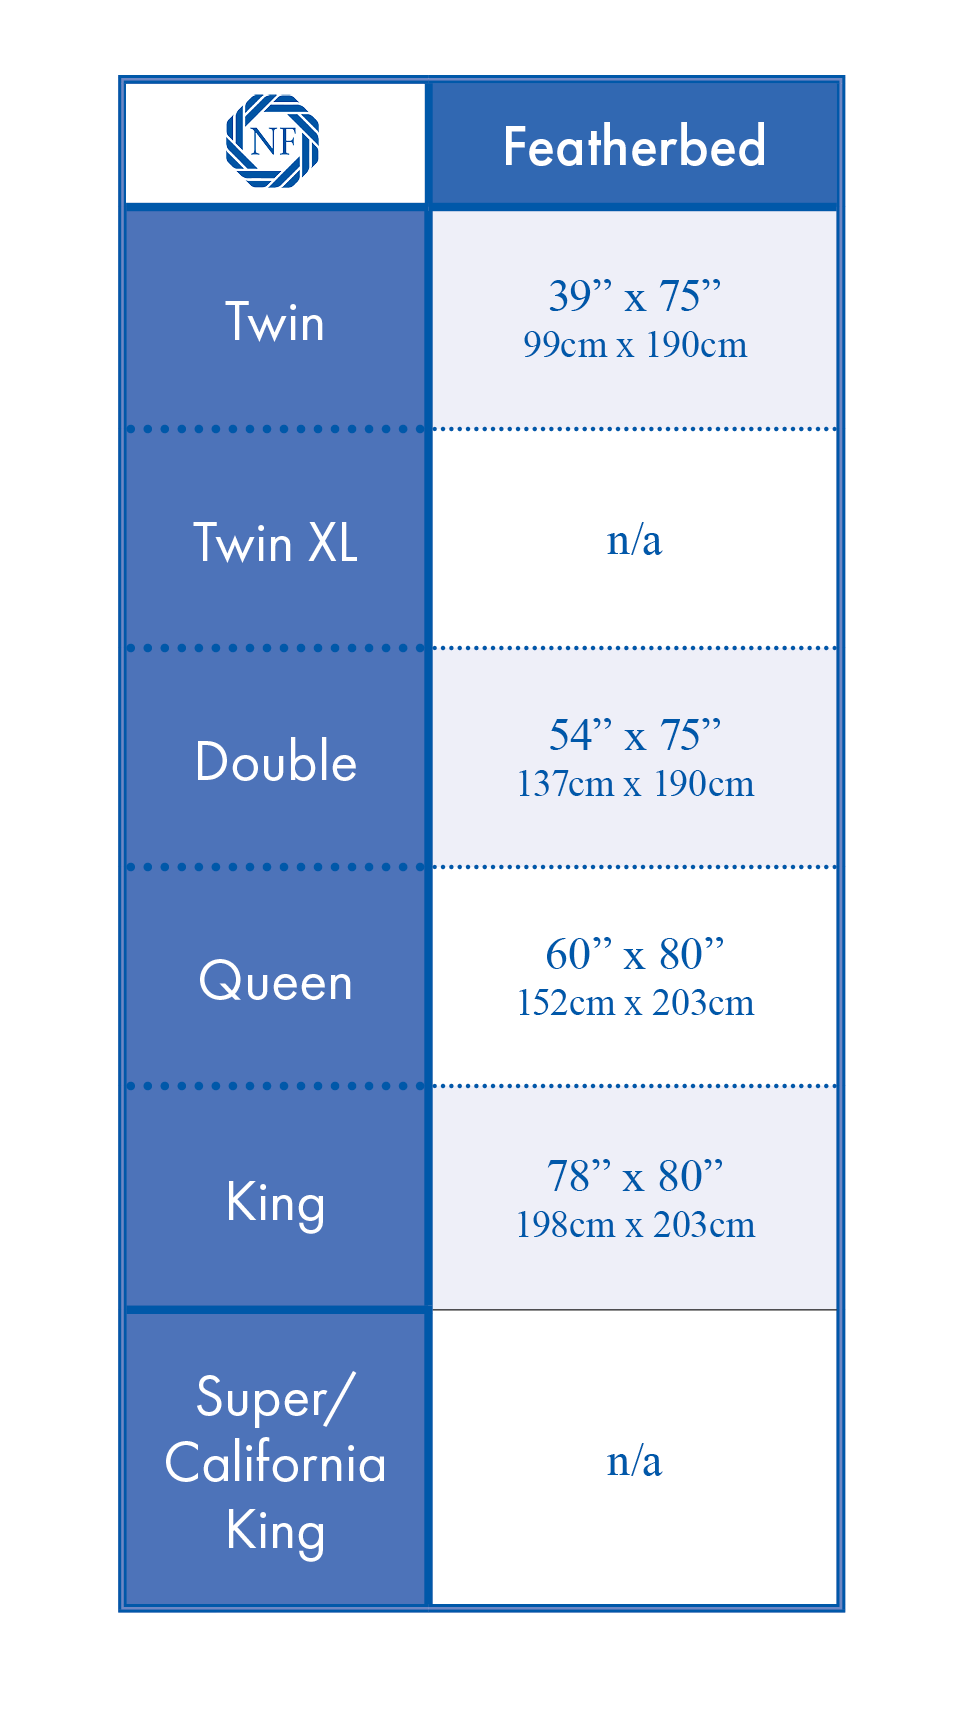 featherbed size chart